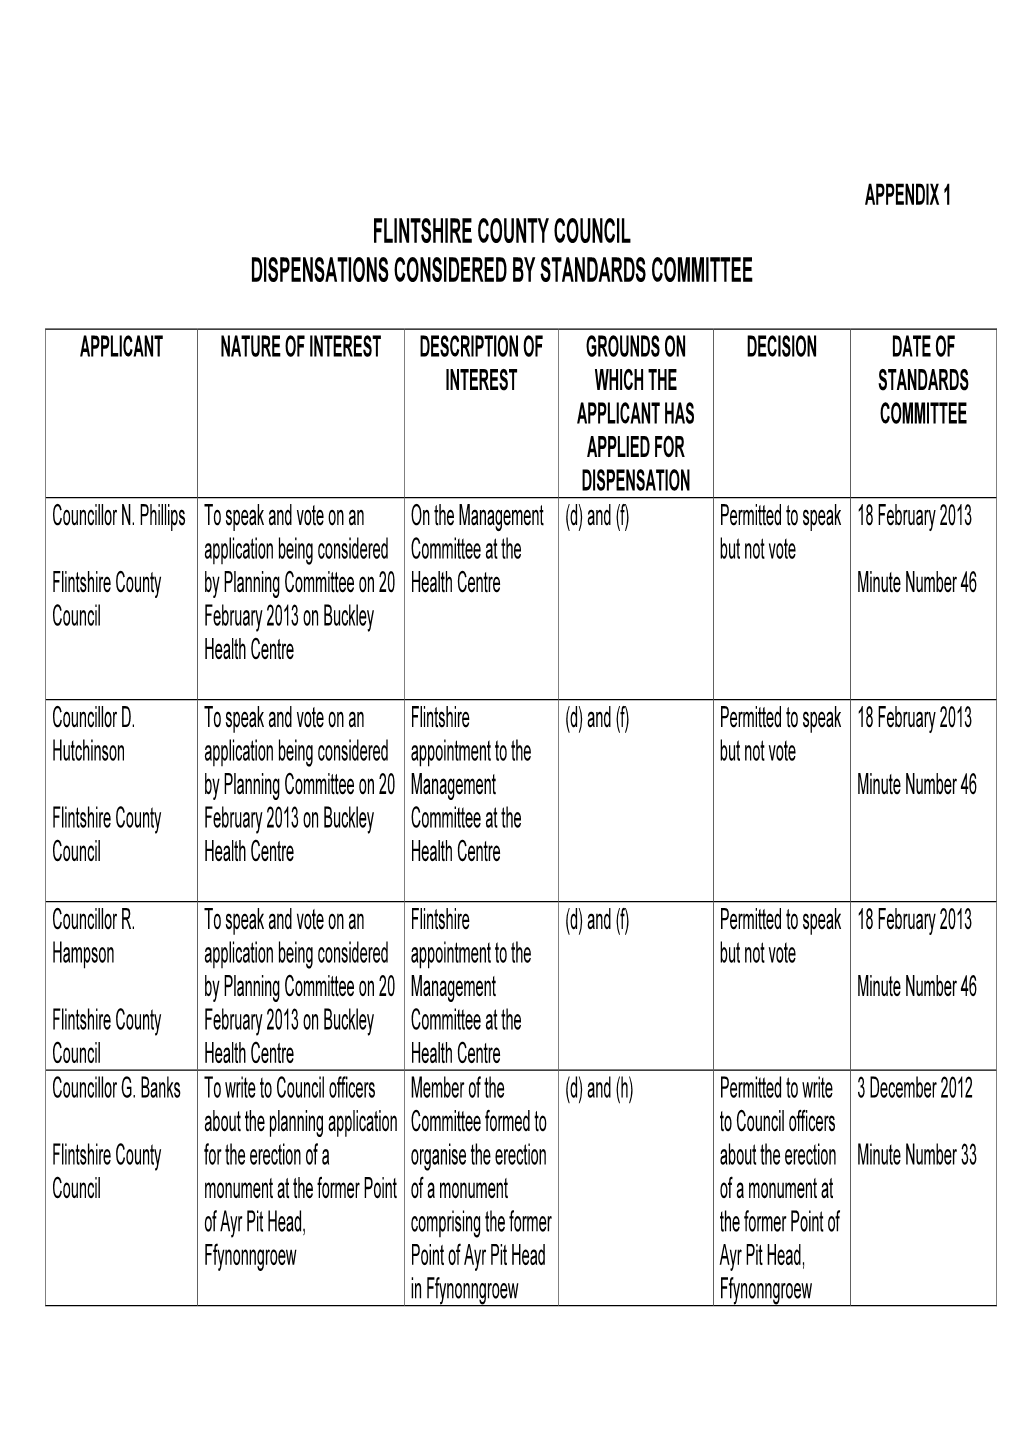 Flintshire County Council Dispensations Considered by Standards Committee